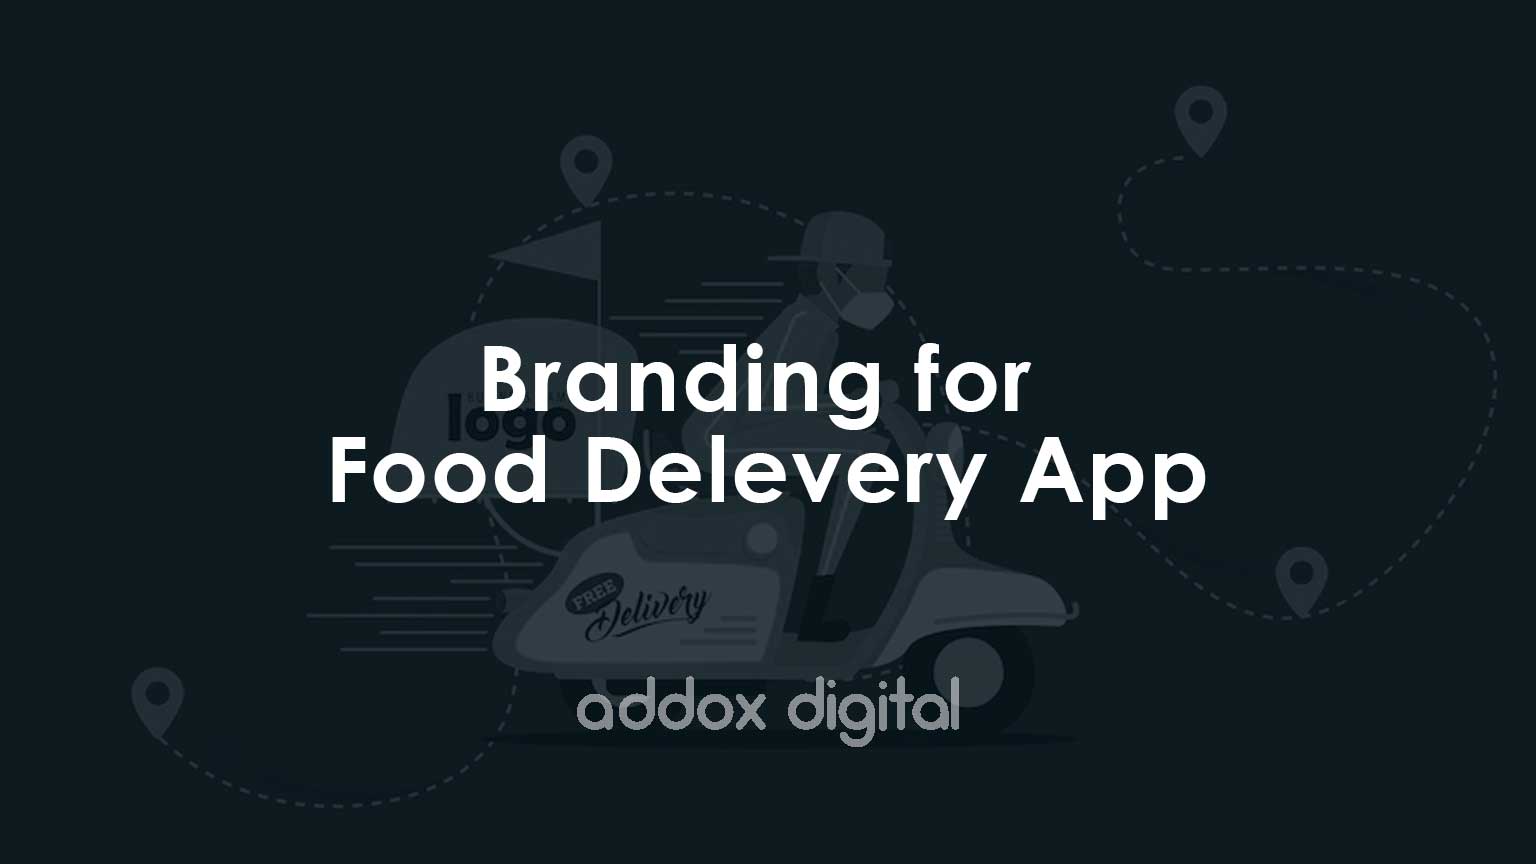 Branding for Food Delevery App